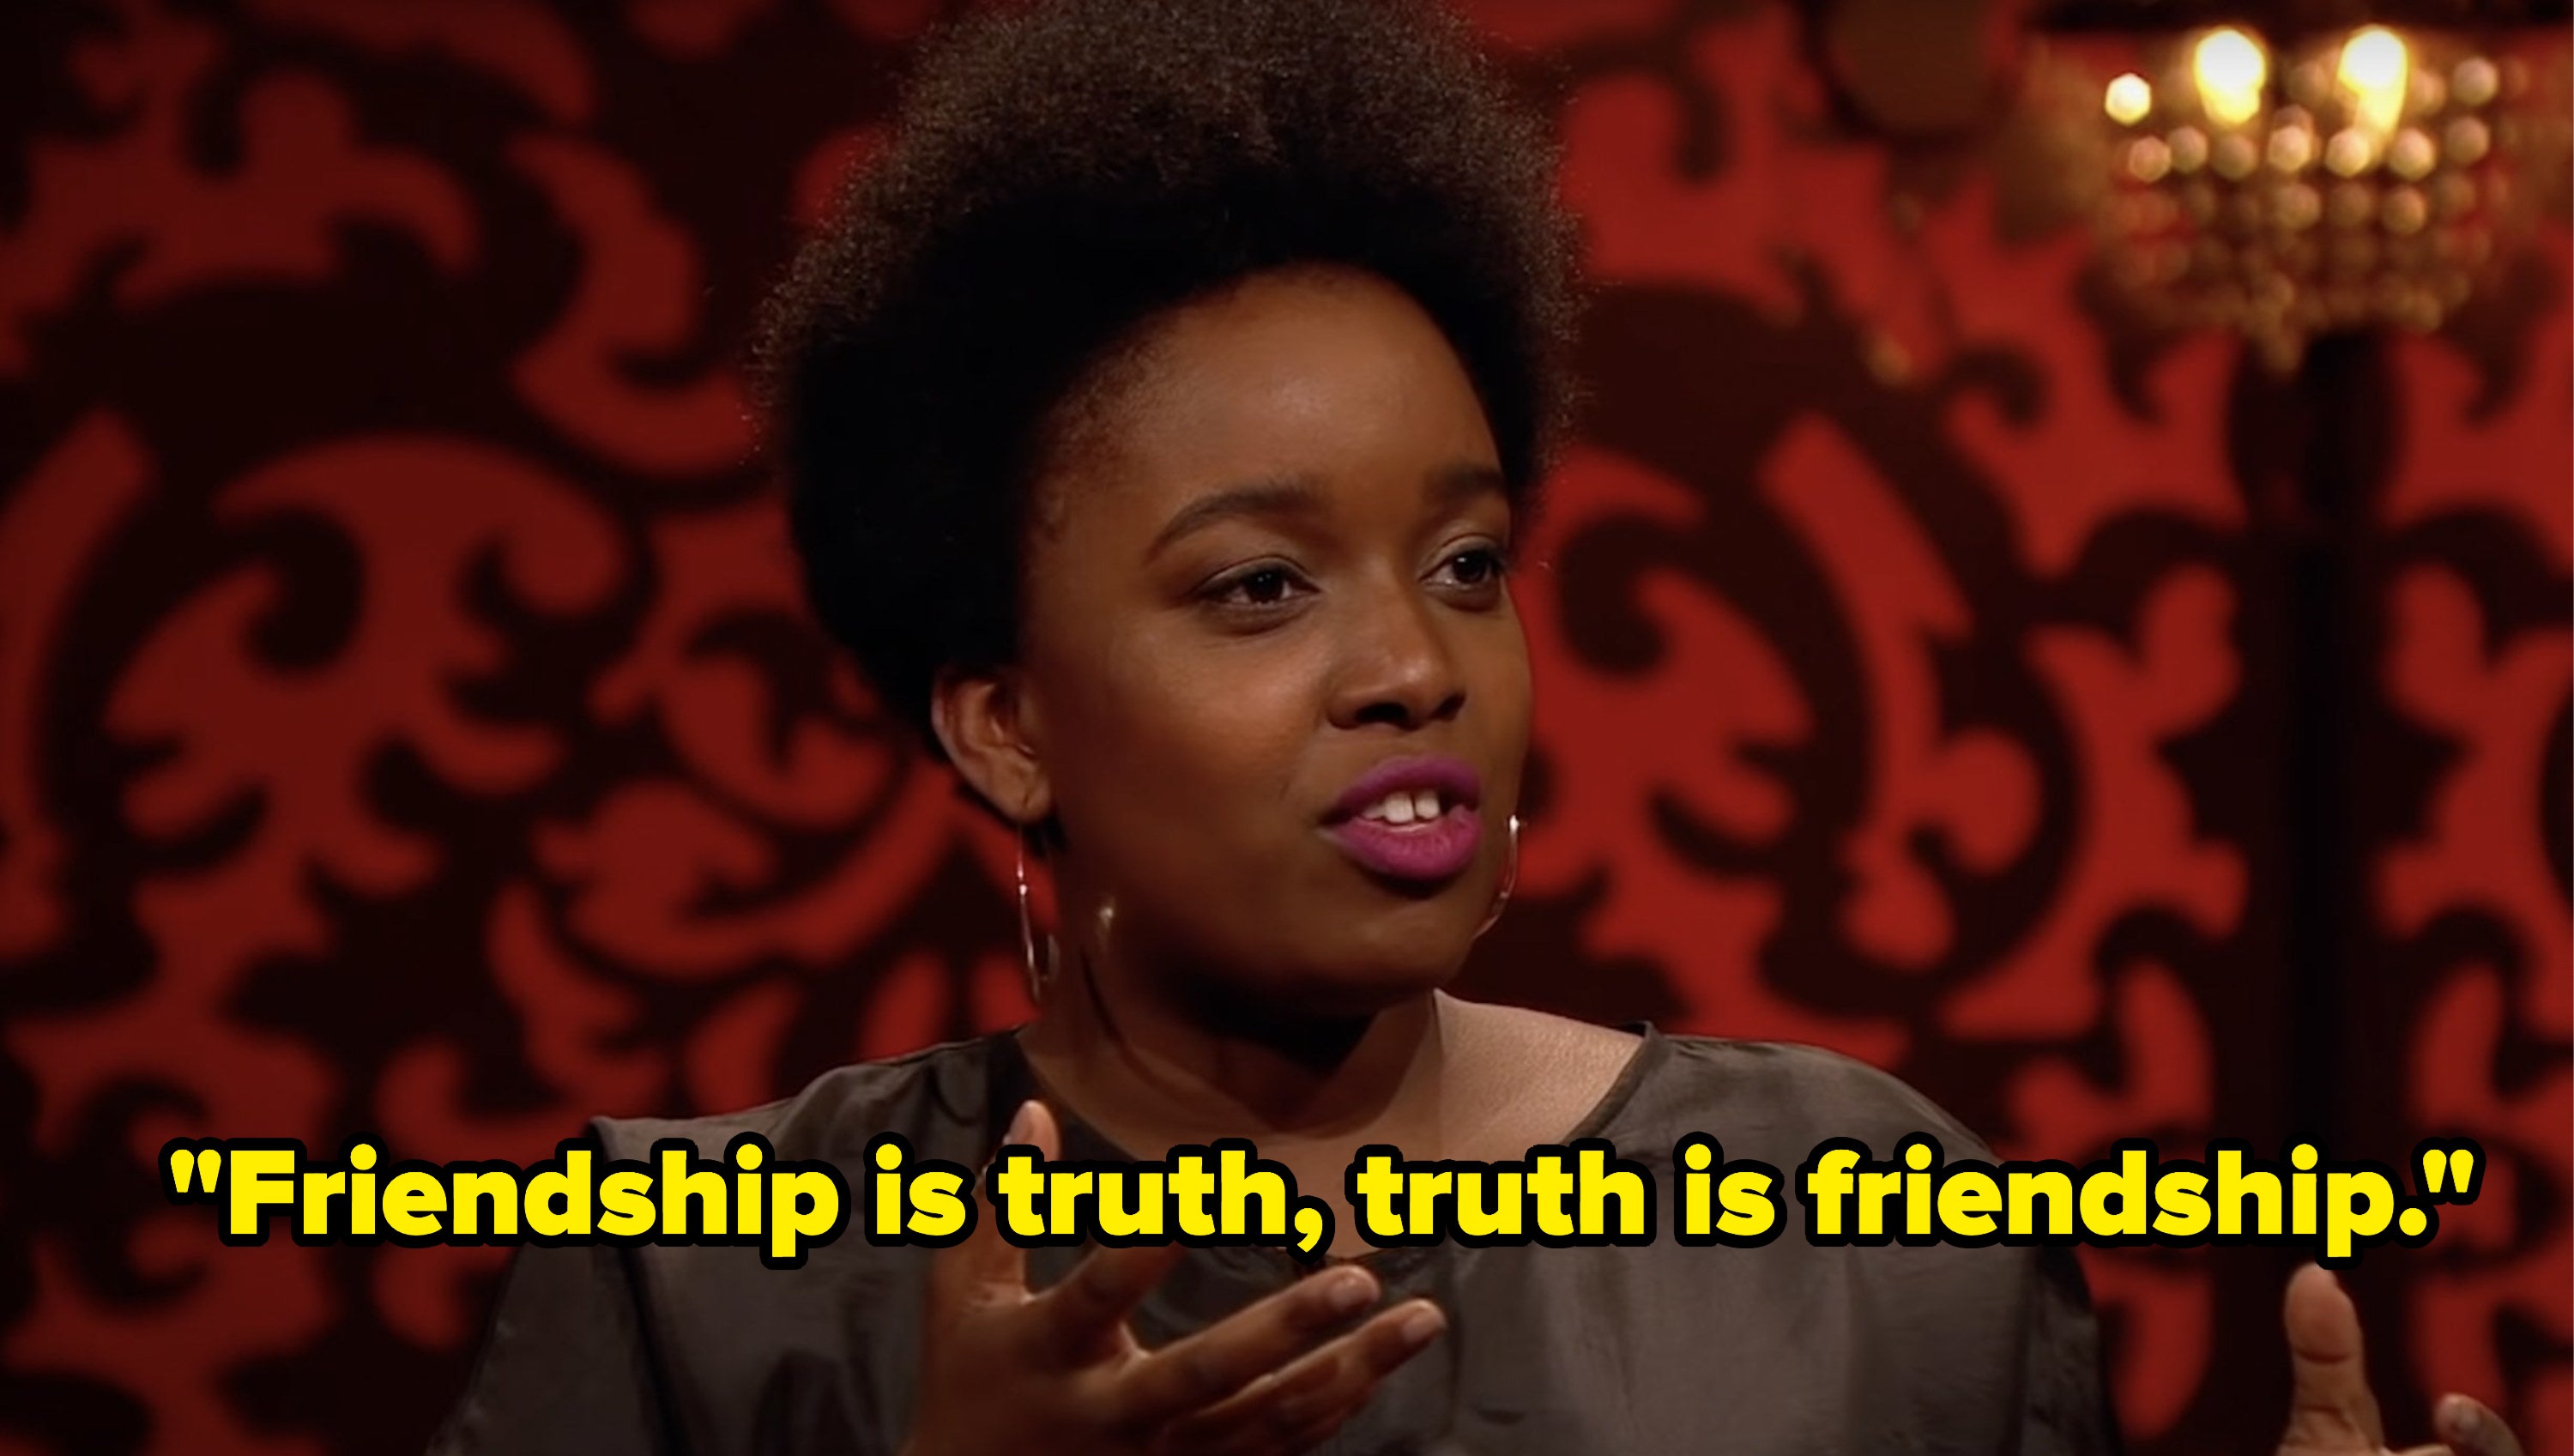 Lolly Adefope says, Friendship is truth, truth is friendship